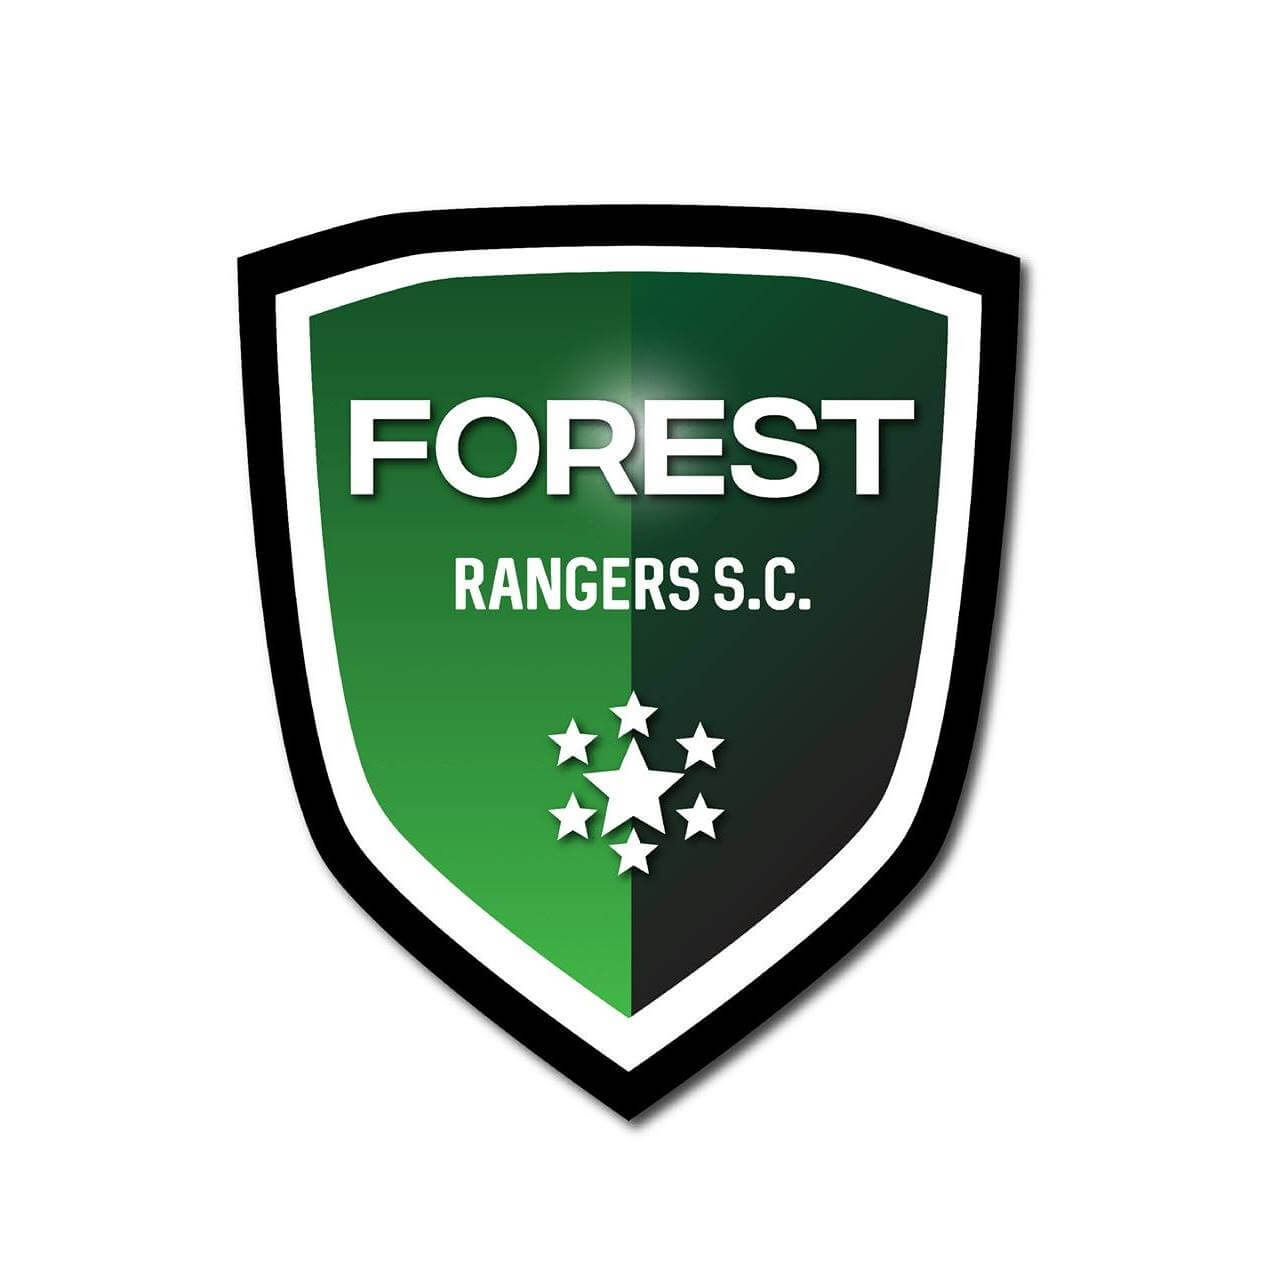 Forest Rangers S.C.